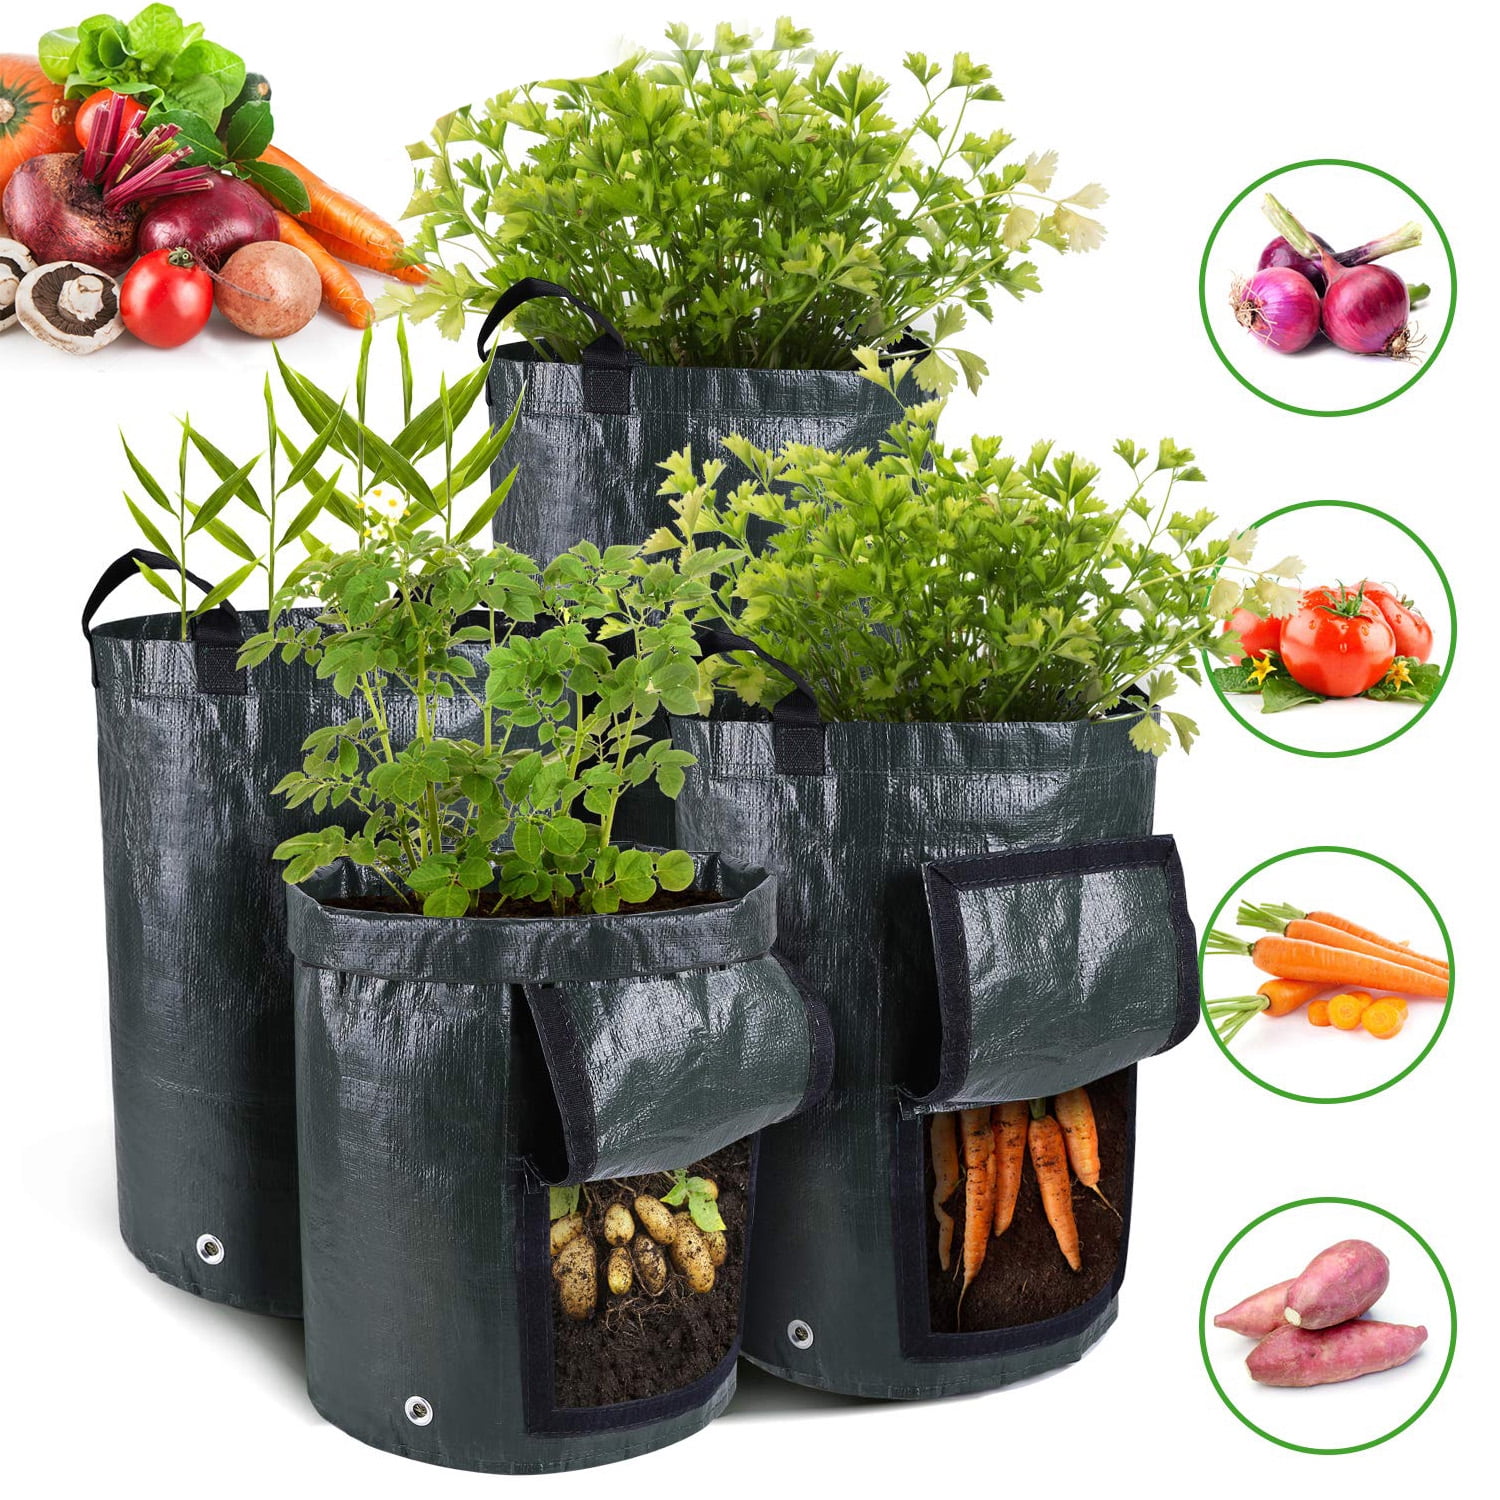 Huouo 2-Pack Potato Planter Growing Tub Vegetables Raised Bed Garden Grow Bag... 